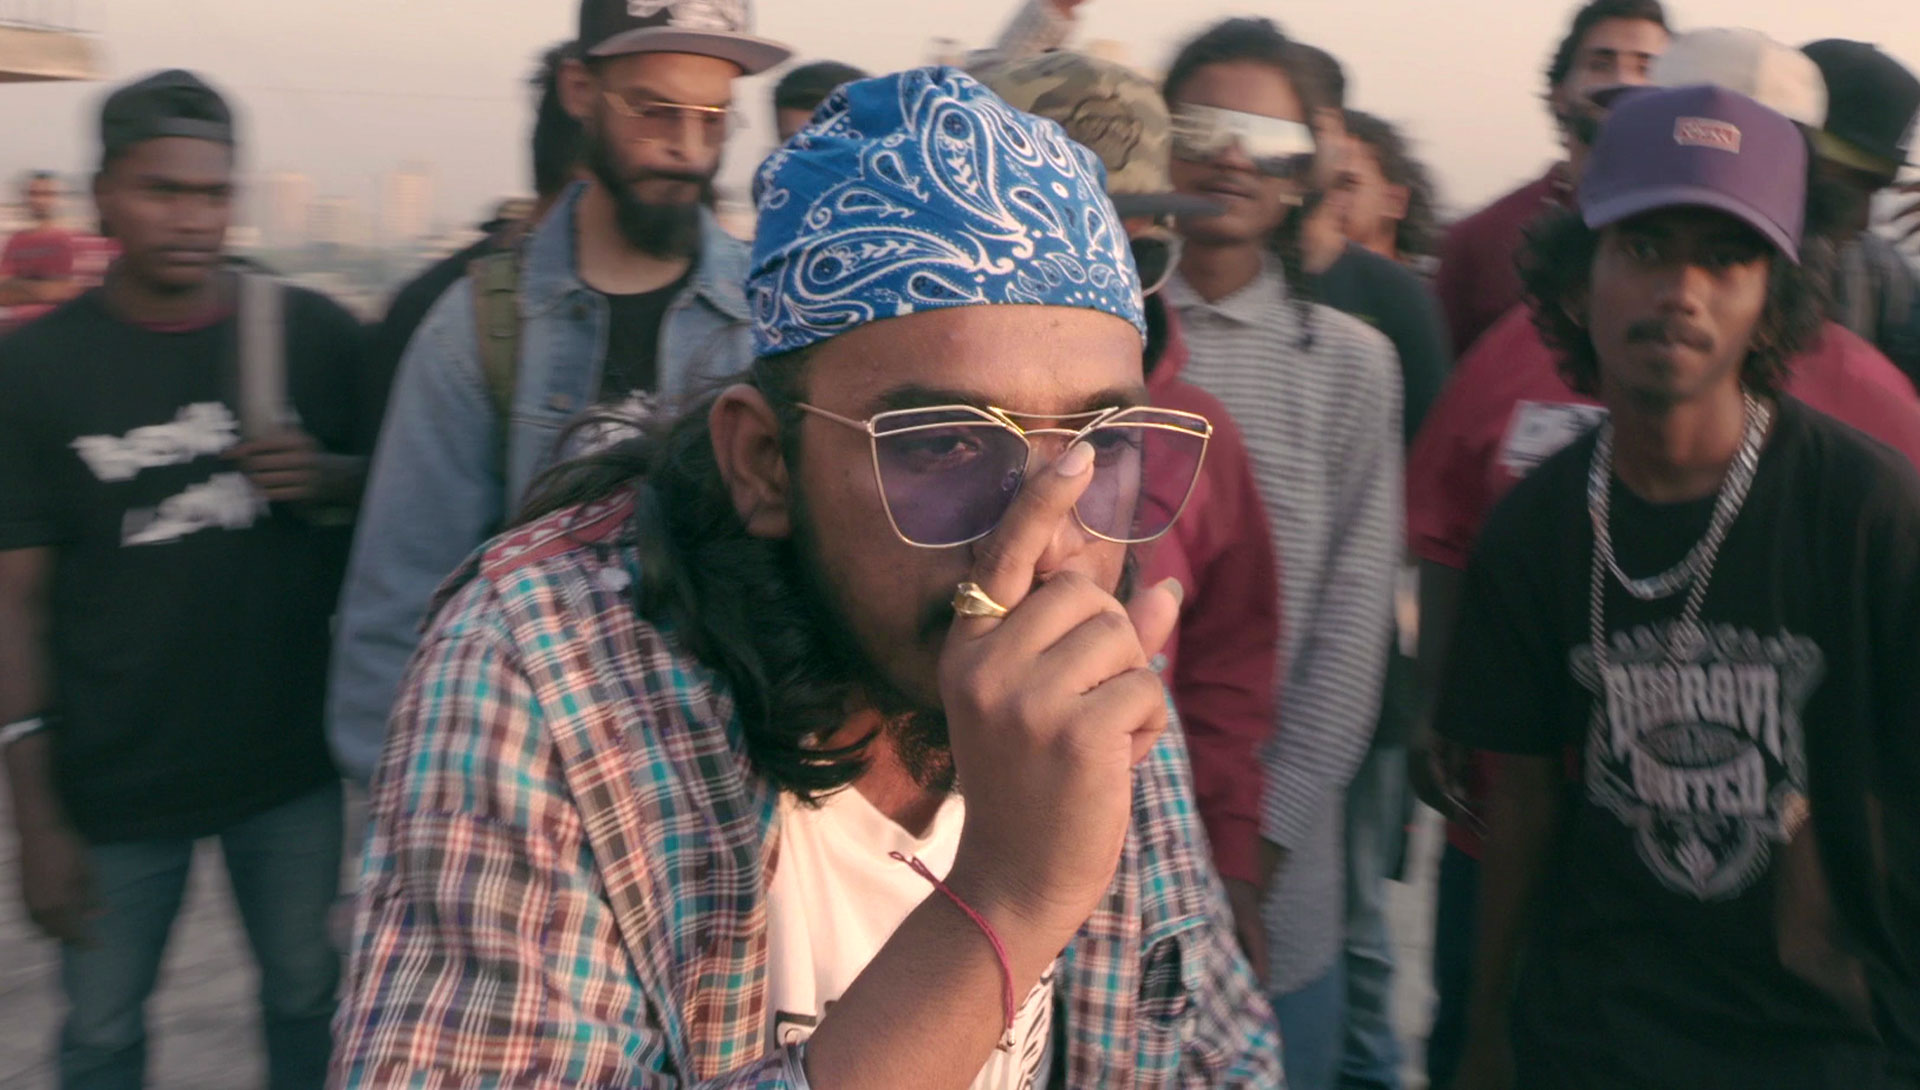 Rapper From India Makes Fun Of Every Gangster Rapper #funnyvoiceover #